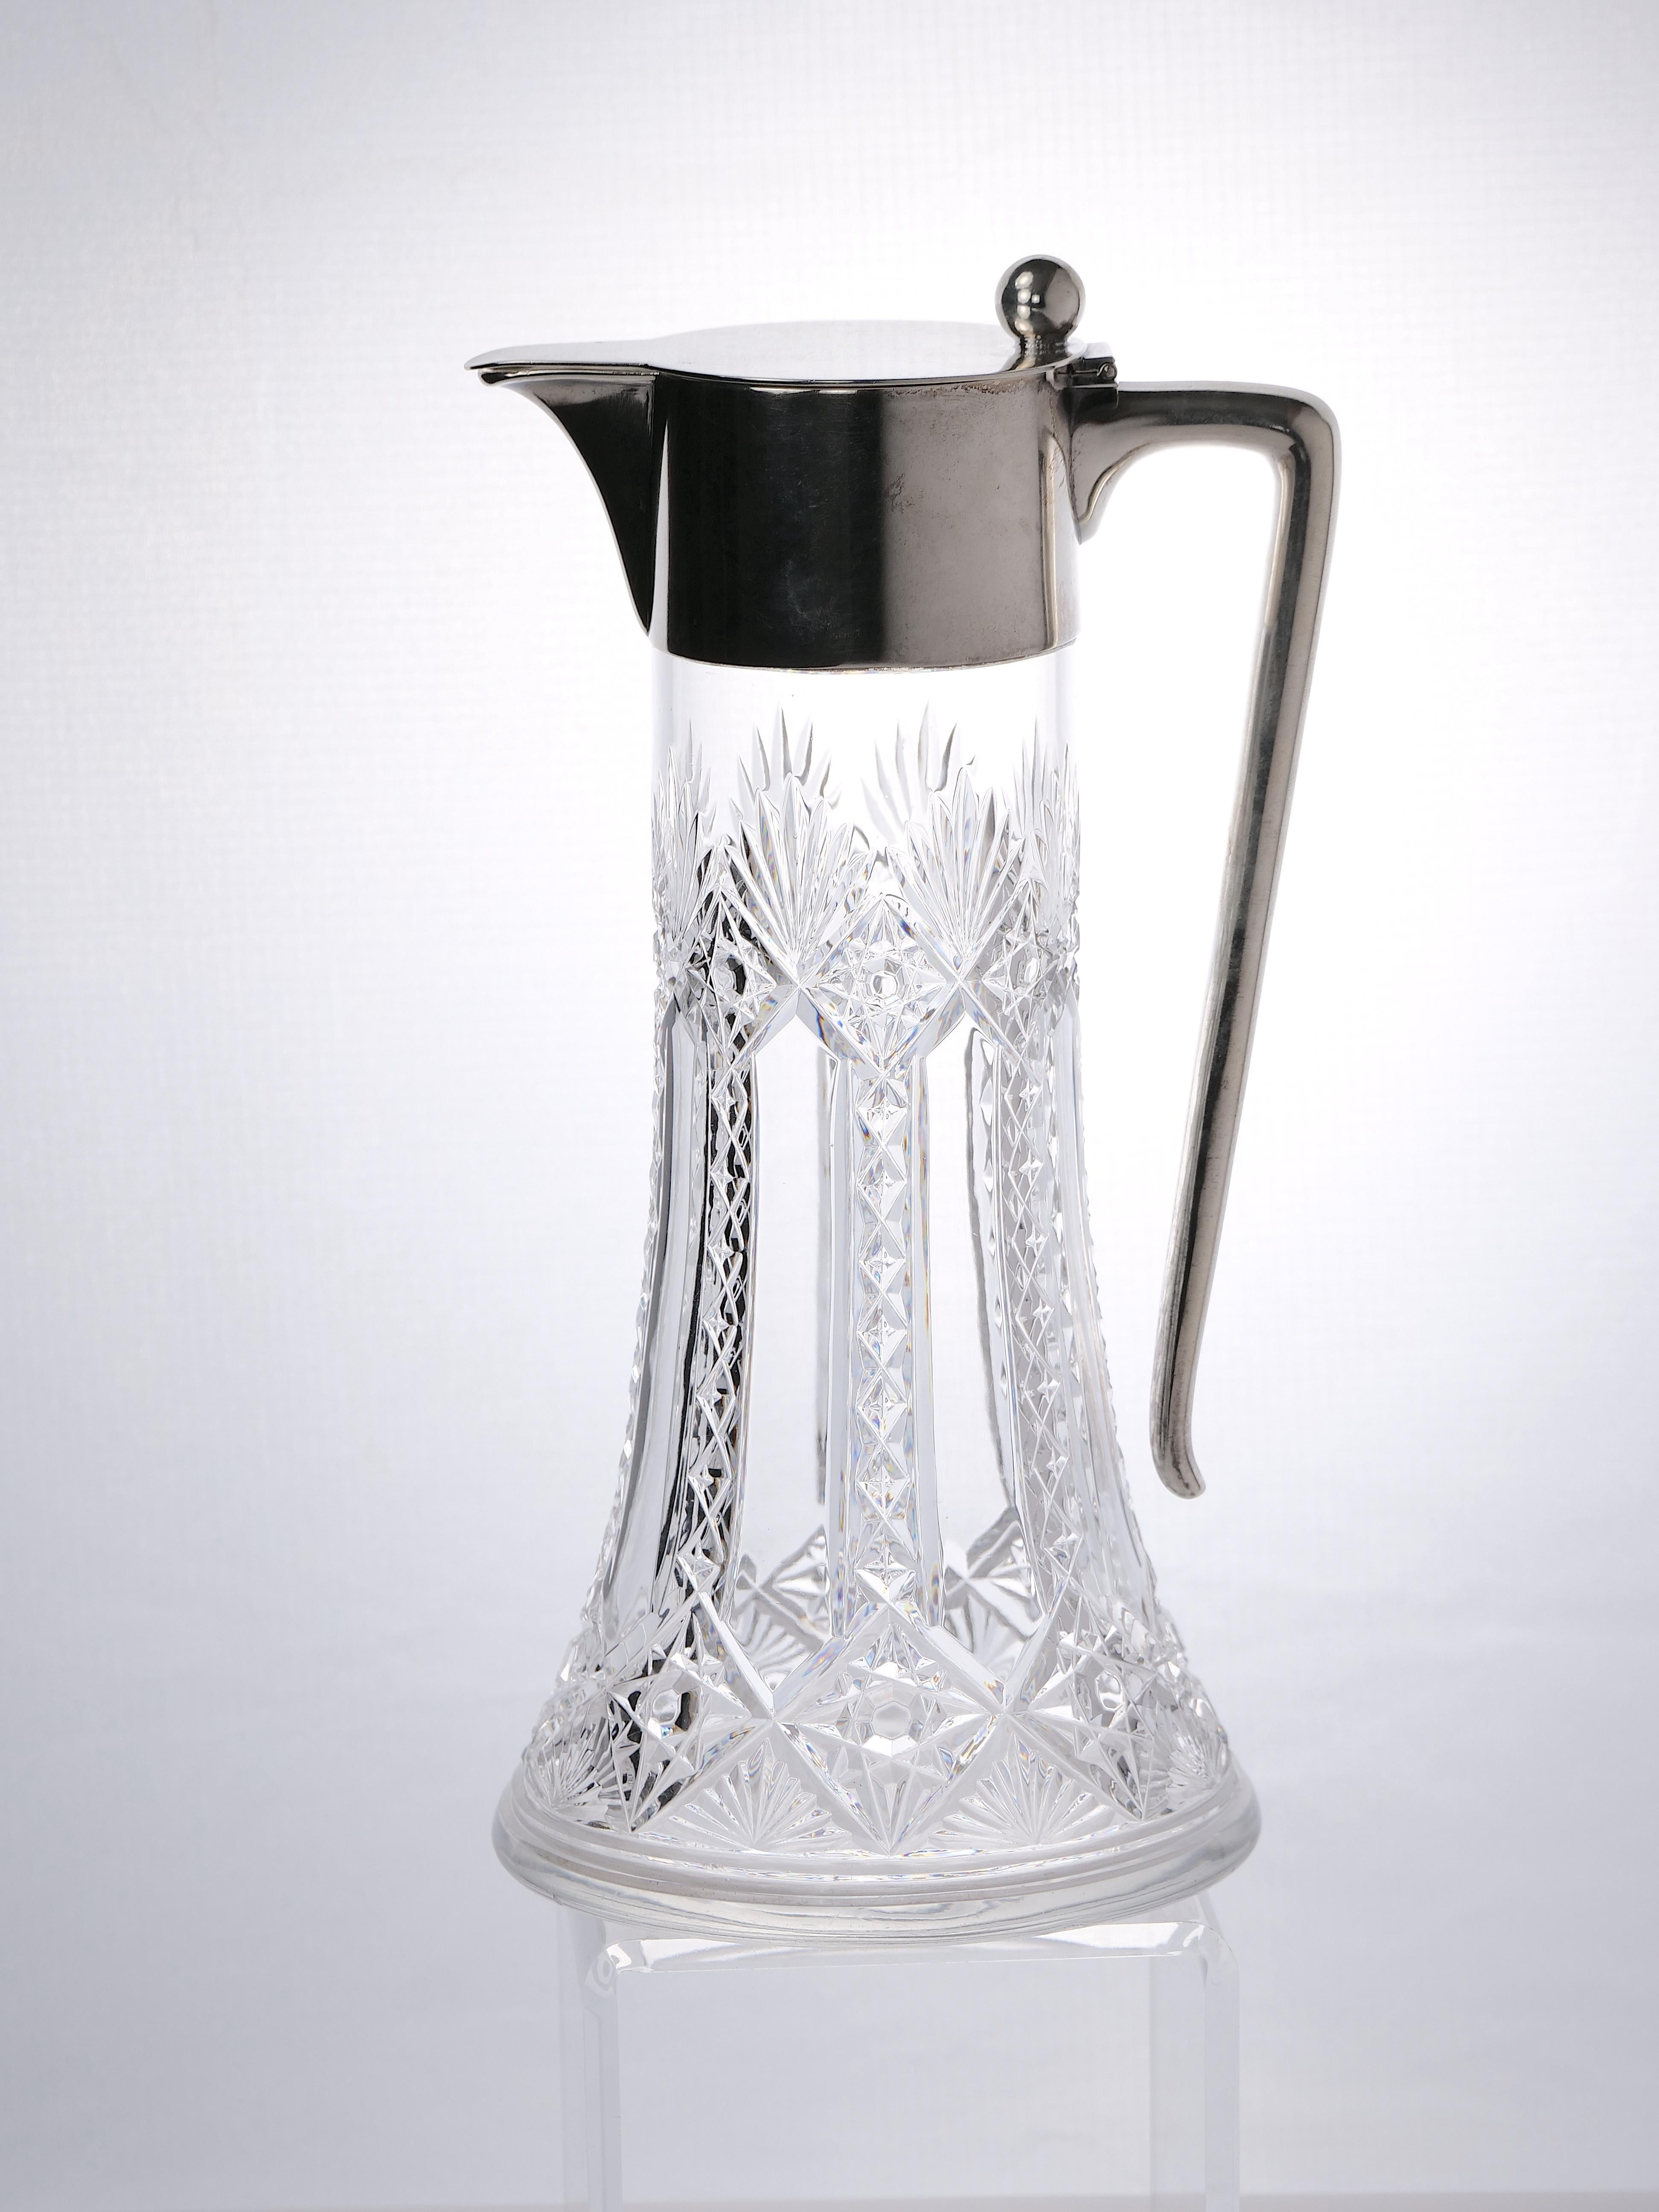 Italian 19th Century Sterling Silver / Cut Glass Claret Jug / Pitcher For Sale